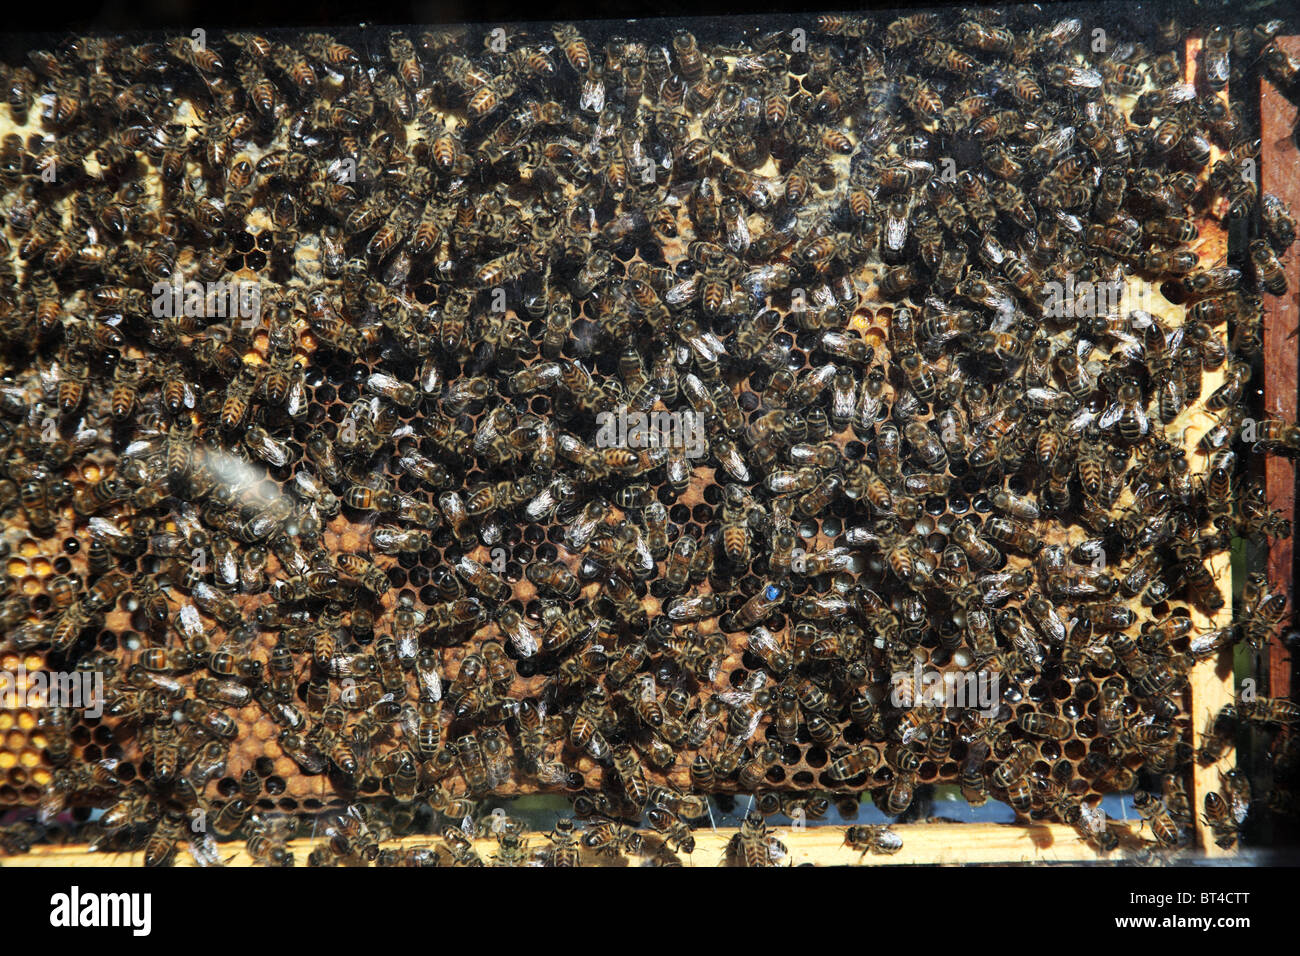 Honey Bees in a display case Stock Photo